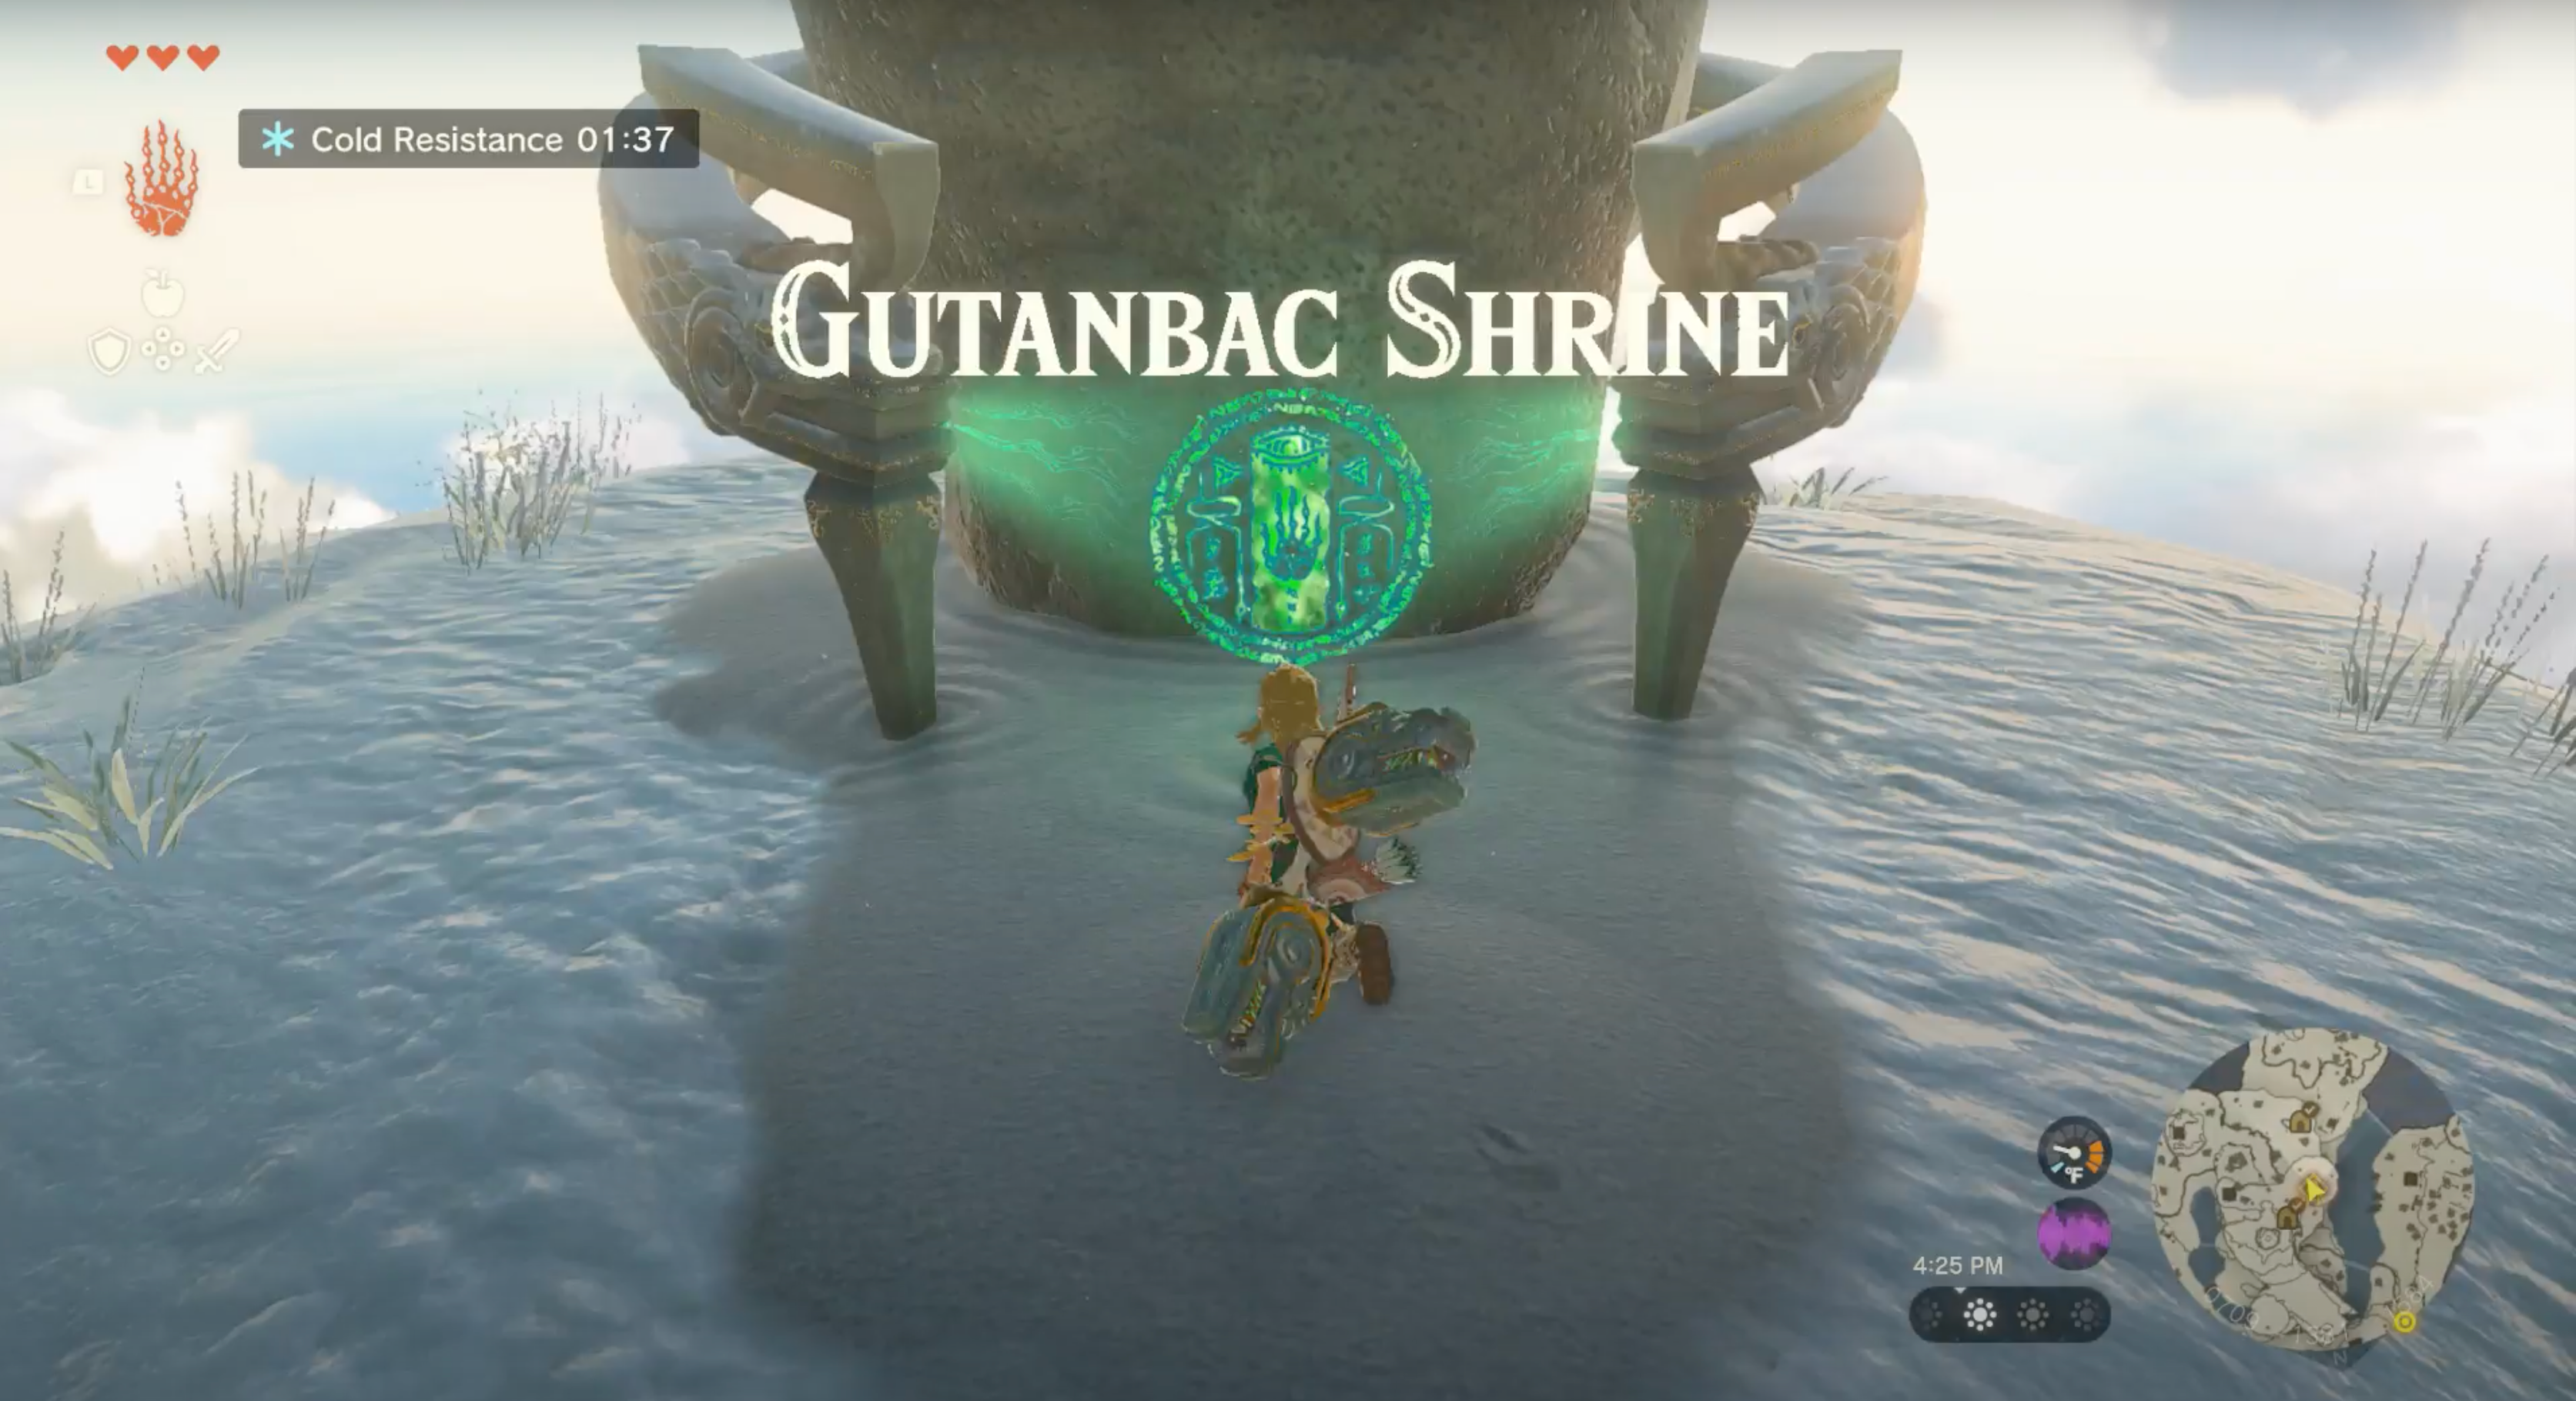 Link standing in front of the Gutanbac Shrine in Zelda: Tears of The Kingdom